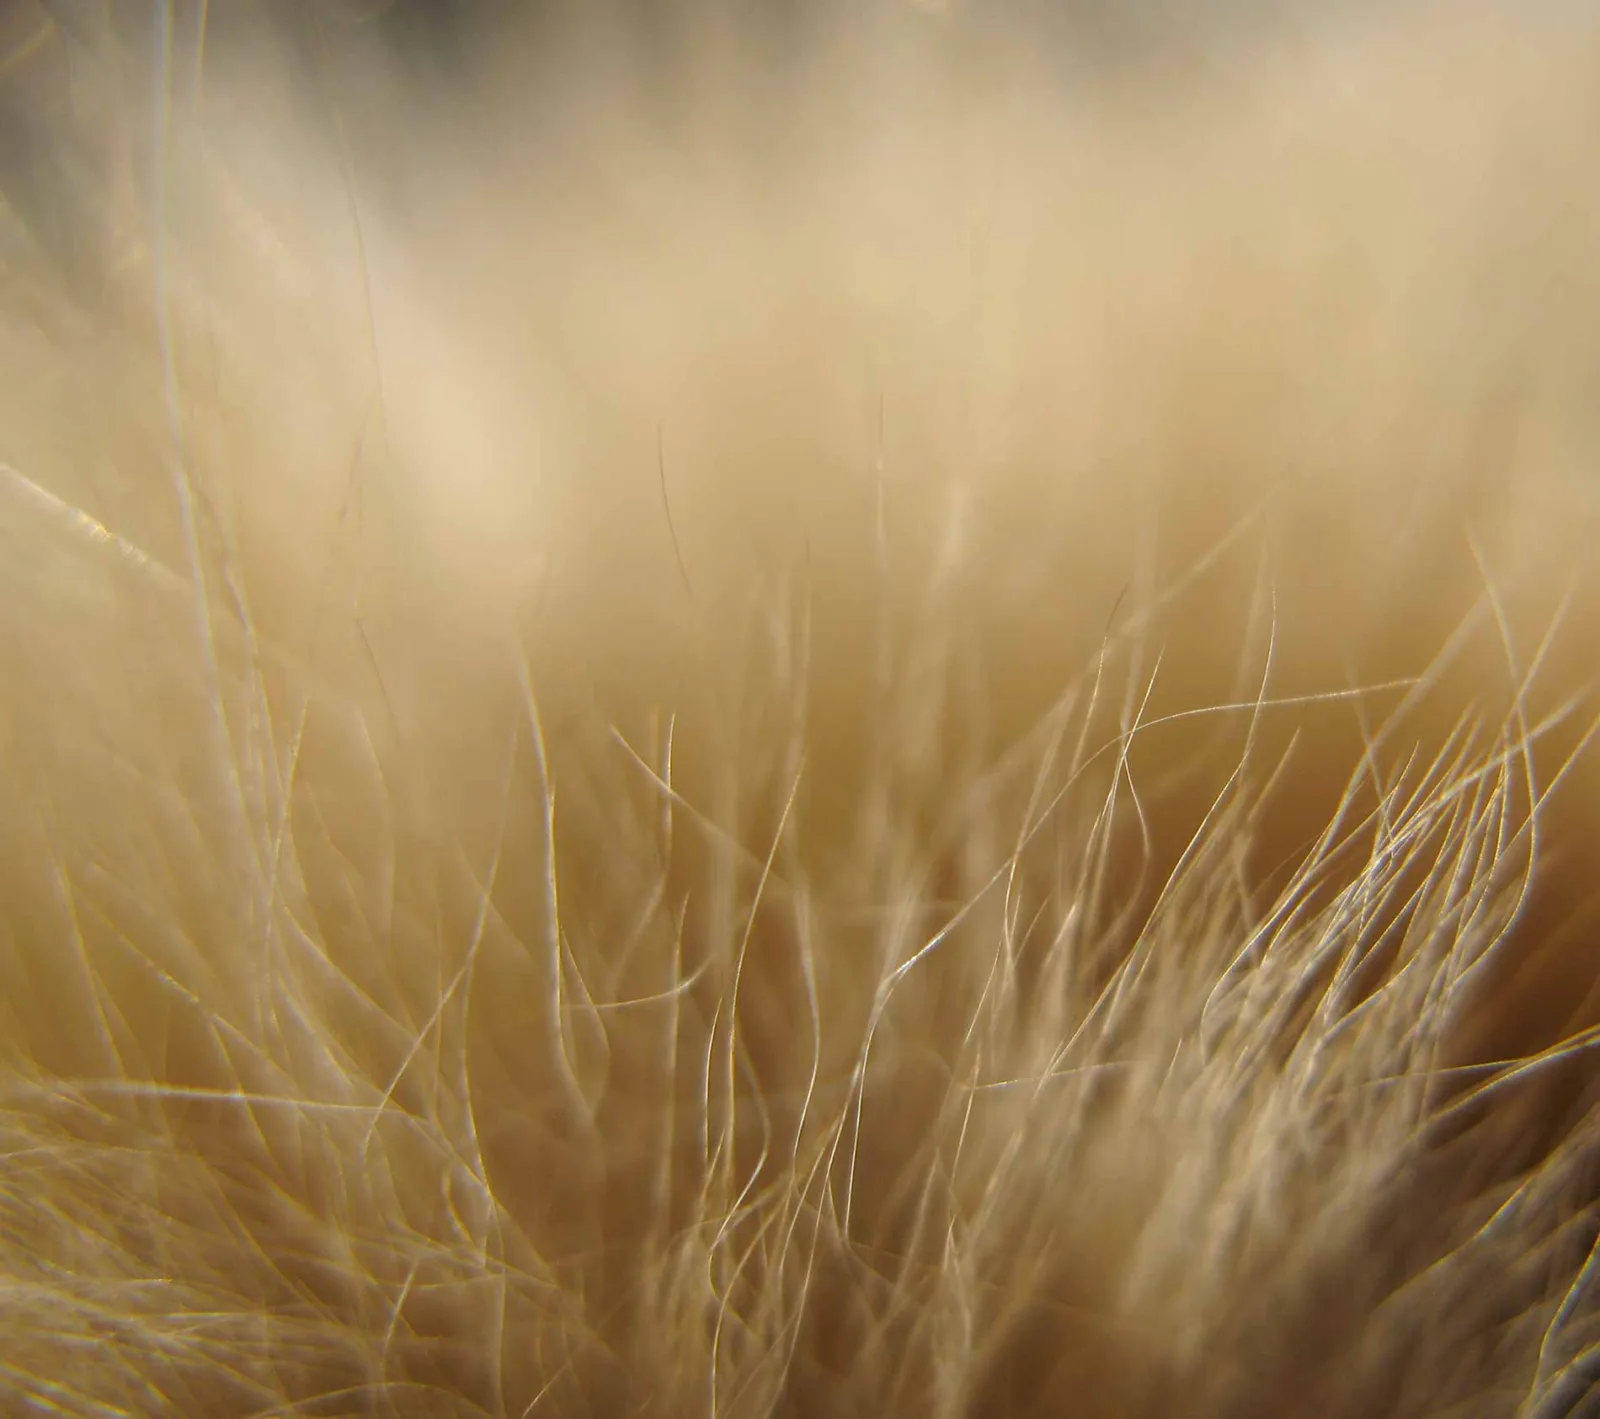 A macro photograph of a cat's fur resembling a dense forest, with light shining through to create a warm, golden glow. The fur is fine and wispy, showing the single hairs taking different directions, making them look like bare, thin tree trunks or twigs.